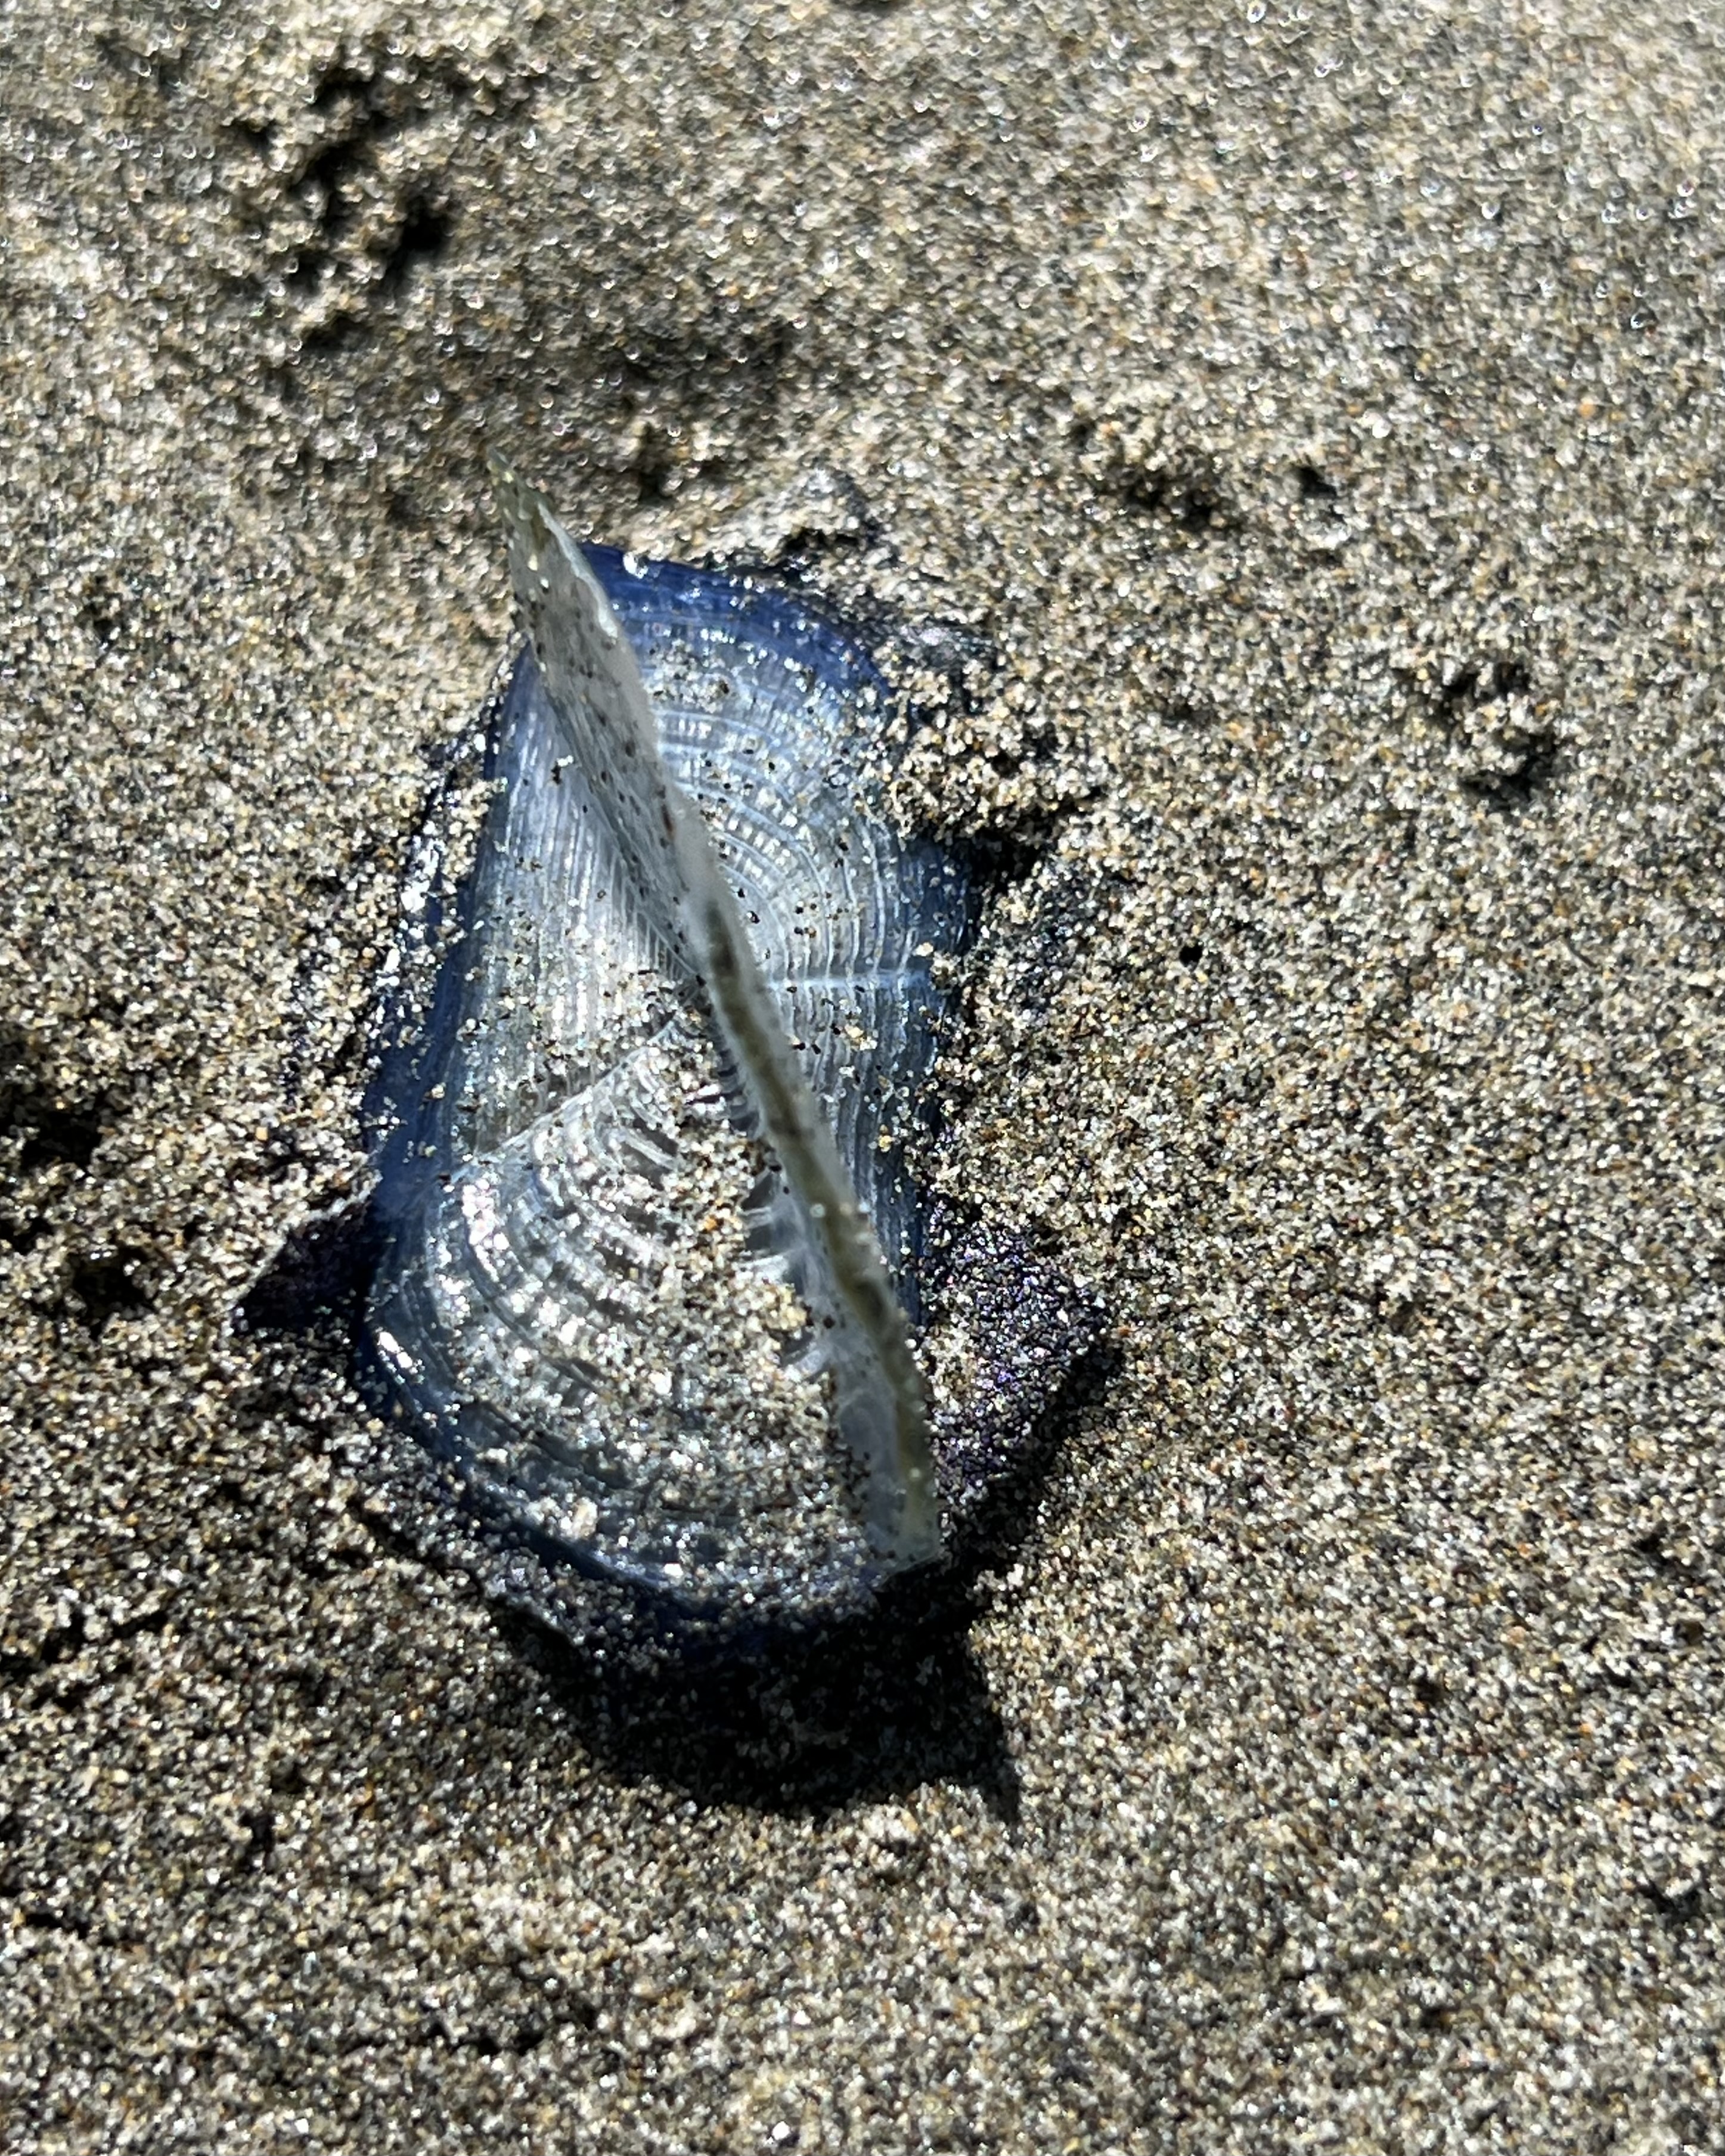 A blue jellyfish-like creature is partly buried in sandy beach.